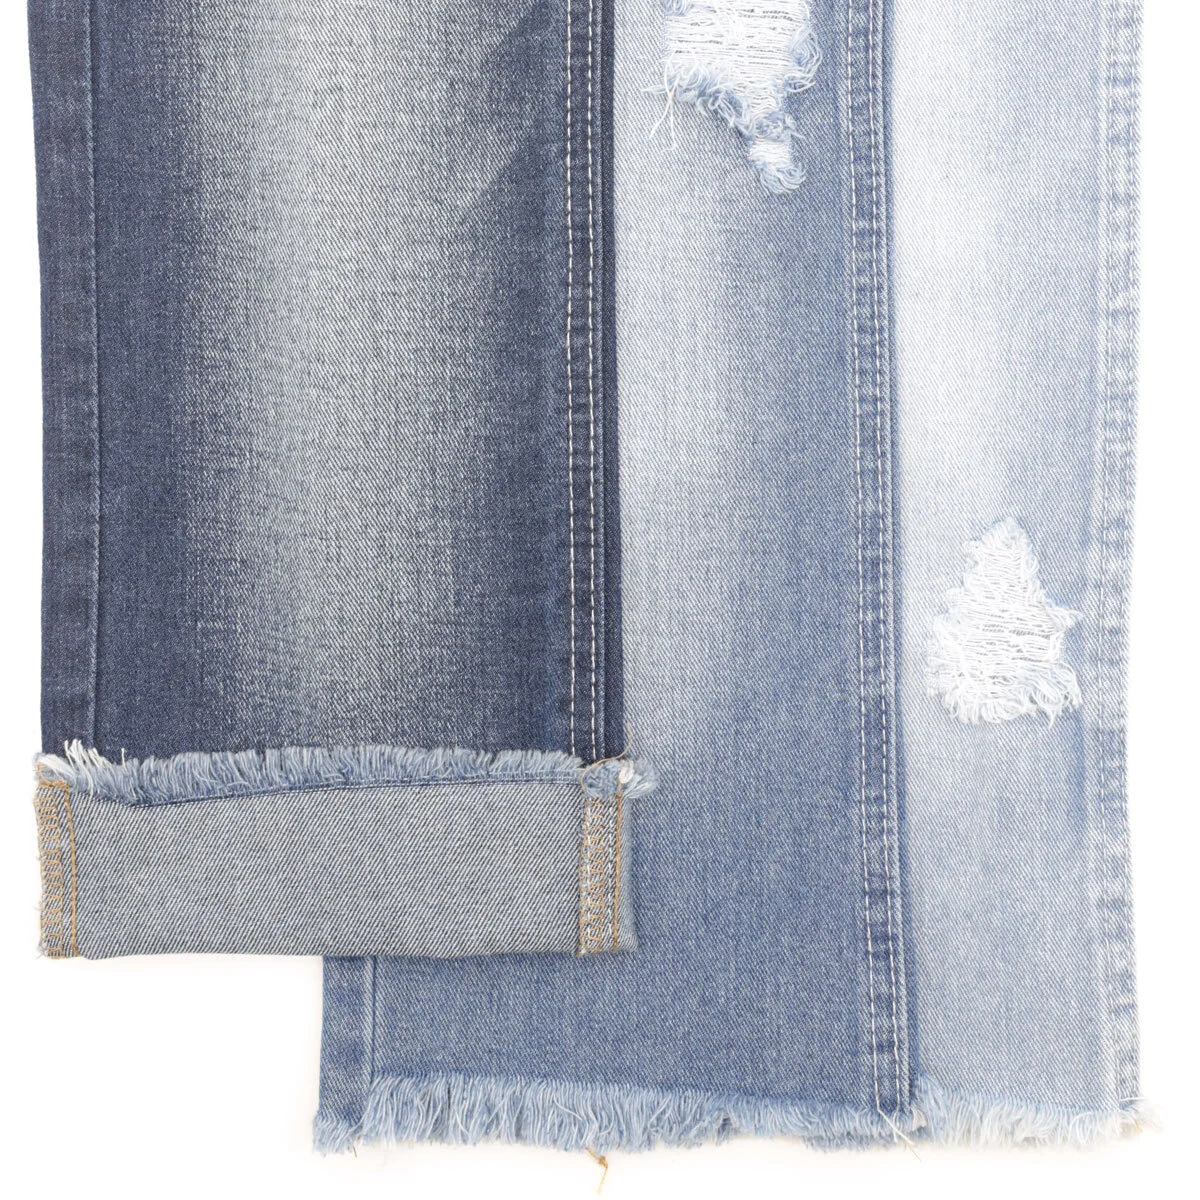 200A-9  75%cotton  14%polyester  11%viscose  Non stretch denim fabric with low price 1